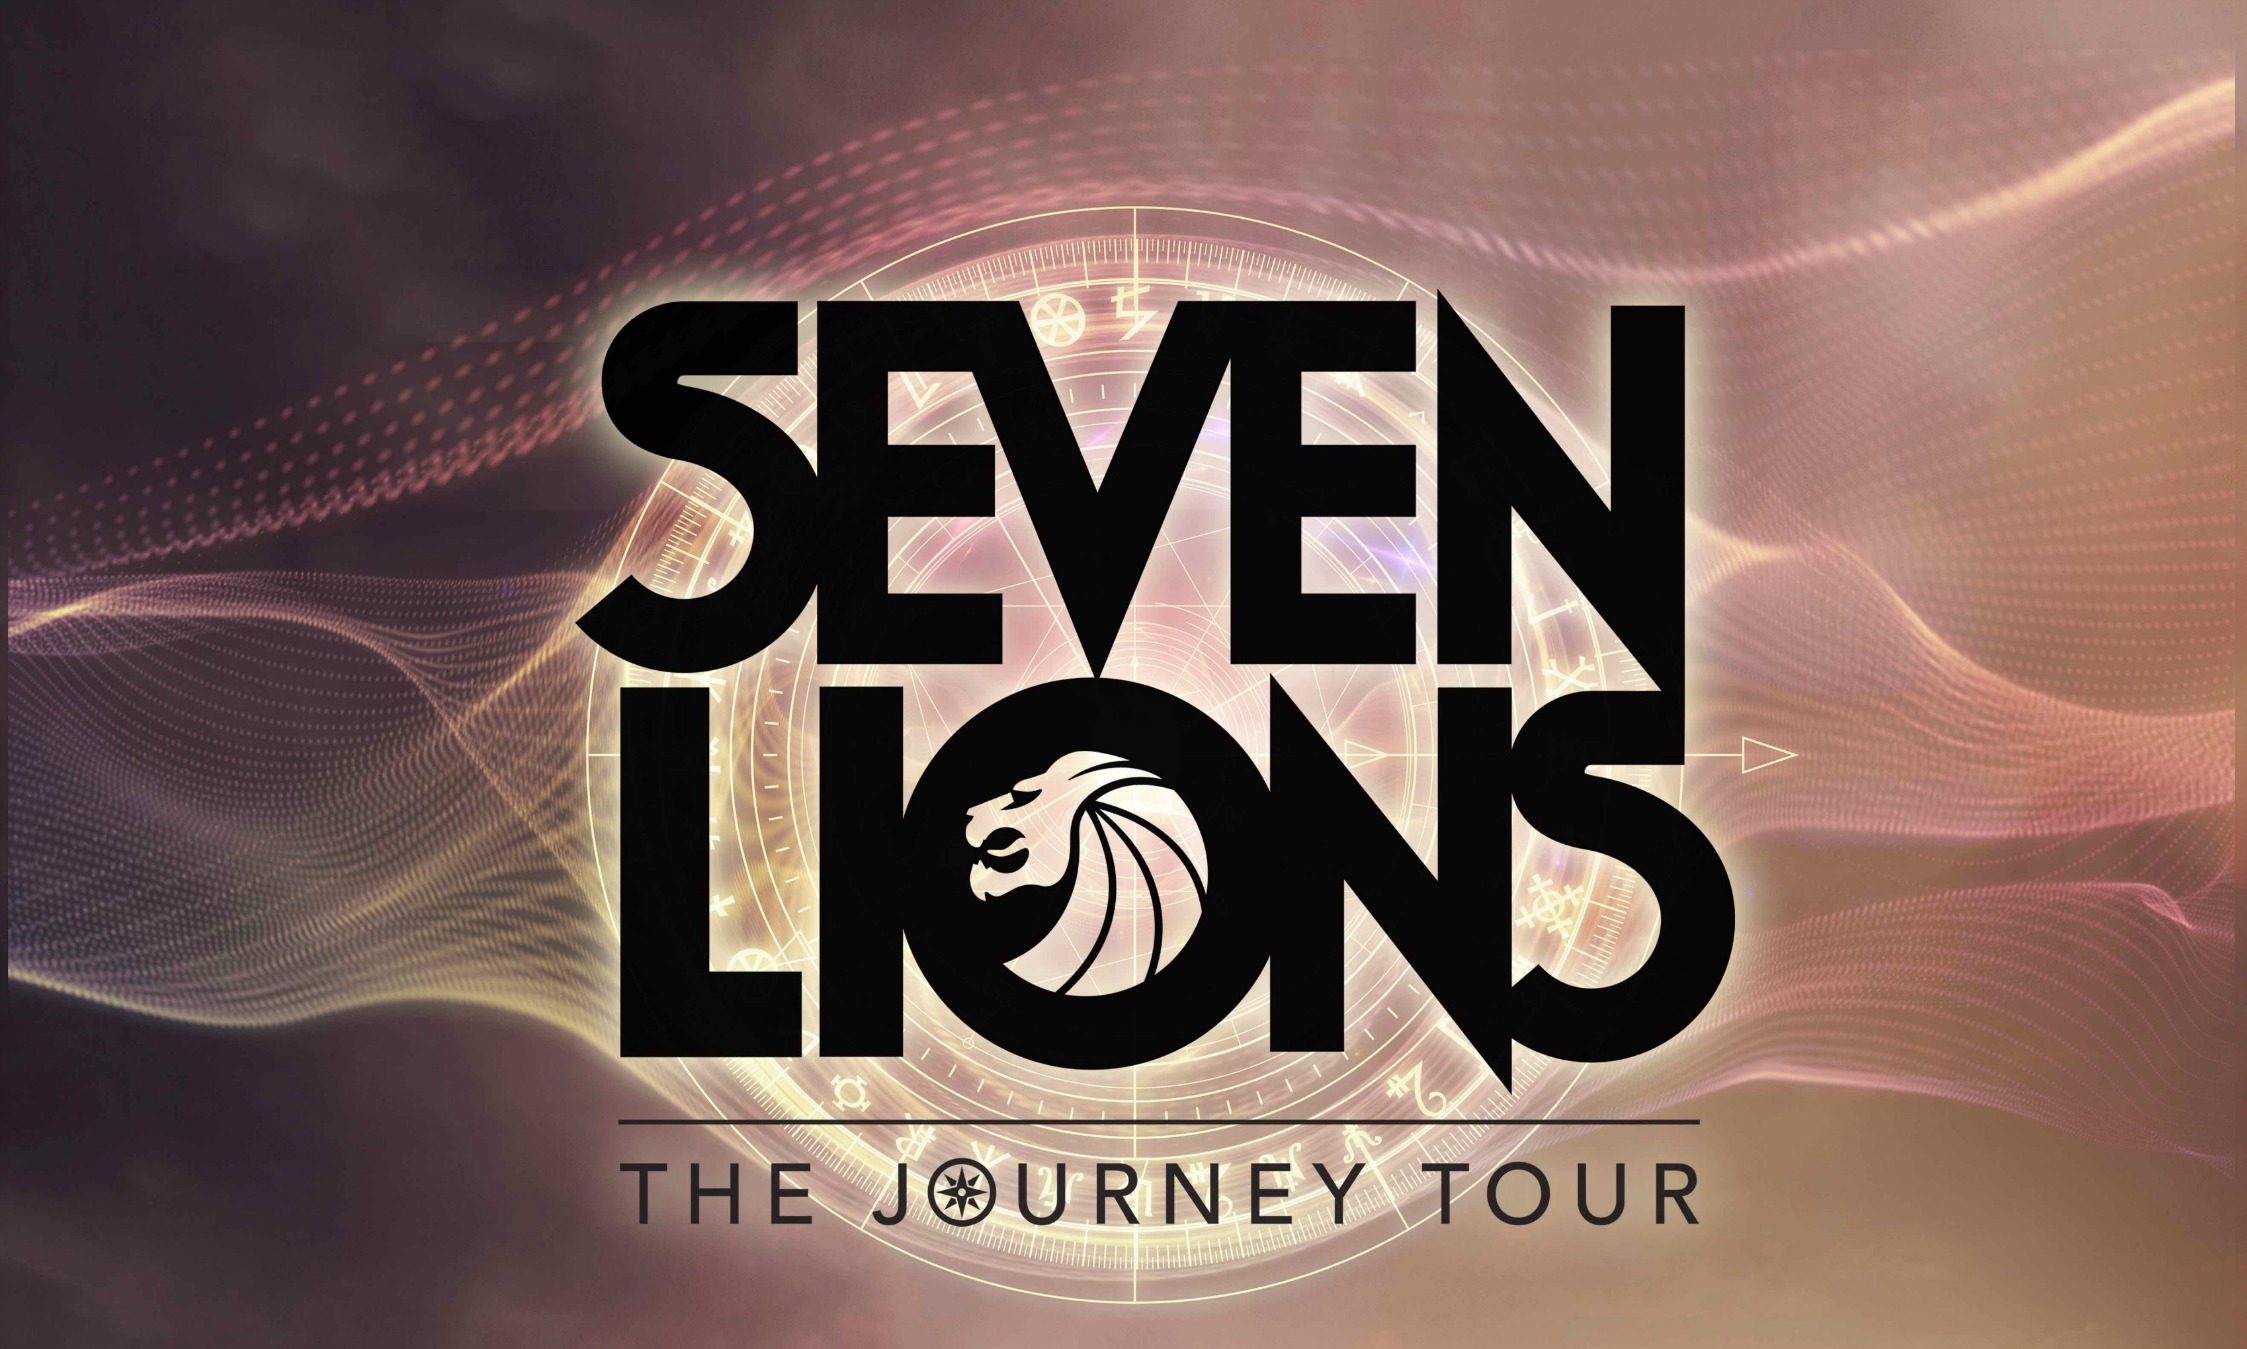 seven lions tour seven lions chicago seven lions indianapolis seven lions strangers seven lions falling away seven lions seattle seven lions days to come seven lions merch seven lions rush over me seven lions live seven lions seven lions album seven lions atlanta seven lions a way to say goodbye seven lions and illenium seven lions age seven lions and pegboard nerds seven lions album cover seven lions ama seven lions artist seven lions a way to say goodbye lyrics seven lions band seven lions boston seven lions buffalo seven lions below us seven lions background seven lions best songs seven lions beautiful seven lions beatport seven lions bogarts seven lions bay area seven lions creation seven lions concert seven lions coming home seven lions cusp seven lions creation lyrics seven lions cosmic love seven lions cleveland seven lions creation ep seven lions charlotte seven lions don't leave seven lions days to come lyrics seven lions december seven lions don't leave lyrics seven lions discography seven lions dc seven lions december lyrics seven lions detroit seven lions denver seven lions echostage seven lions ellie goulding seven lions edm seven lions events seven lions equipment seven lions ellie goulding lyrics seven lions essential mix seven lions europe tour seven lions falling away lyrics seven lions falling away festival seven lions flag seven lions facebook seven lions fevers seven lions falling away mitis seven lions fractals seven lions falling away remix seven lions fox theater seven lions genre seven lions great divide seven lions gear seven lions grum seven lions graduate seven lions gathering darkness seven lions goodbye seven lions great divide lyrics seven lions goodbye lyrics seven lions gainesville seven lions hollywood seven lions hoodie seven lions house of blues seven lions higher ground seven lions haliene seven lions higher love lyrics seven lions halloween seven lions house of blues tickets seven lions hits seven lions hour mix seven lions illenium seven lions isis seven lions instagram seven lions illenium rush over me seven lions interview seven lions i need you seven lions itunes seven lions id seven lions illenium tour i need you seven lions seven lions journey tour seven lions jason ross seven lions jeff montalvo seven lions jewel seven lions jason ross paul meany seven lions jewel nightclub seven lions july 26 seven lions july 25 seven lions japan seven lions june seven lions keep it close seven lions kandi seven lions keep it close lyrics seven lions kerli seven lions keep it close meaning seven lions kick seven lions kap slap seven lions koreatown seven lions keep it close mp3 seven lions krewella seven lions logo seven lions lyrics seven lions lucy seven lions lose myself seven lions leaving earth seven lions los angeles seven lions lights seven lions lucy lyrics seven lions label seven lions mix seven lions music seven lions meaning seven lions milwaukee seven lions movie seven lions menu seven lions myon & shane 54 - strangers lyrics seven lions mixcloud seven lions music video seven lions net worth seven lions new song seven lions nyc seven lions new album seven lions name seven lions new orleans seven lions norva seven lions new seven lions nepenthe seven lions new song 2016 seven lions oakland seven lions observatory seven lions outfit seven lions on my way to heaven seven lions occult seven lions owsla seven lions orlando seven lions osu seven lions orange county seven lions one more time seven lions perler seven lions palladium seven lions pegboard nerds seven lions philadelphia seven lions phoenix seven lions polarized seven lions playlist seven lions poster seven lions perler pattern seven lions polarize ep seven lions quotes seven lions restaurant seven lions rush over me lyrics seven lions remix seven lions raleigh seven lions real name seven lions reddit seven lions royal oak seven lions running to the sea seven lions rave seven lions soundcloud seven lions strangers lyrics seven lions songs seven lions shirt seven lions summer of the occult seven lions san diego seven lions set seven lions serpent of old seven lions twitter seven lions ticketmaster seven lions terminal 5 seven lions tracklist seven lions t shirt seven lions tattoo seven lions tove lo seven lions tabernacle seven lions the great divide t-shirt seven lions seven lions upcoming shows seven lions usc seven lions uniun seven lions ultra 2014 seven lions ultra 2013 seven lions universe seven lions unreleased seven lions ultra set list seven lions uses fl studio seven lions universe to me seven lions vinyl seven lions visuals seven lions vegas seven lions video seven lions vancouver seven lions vk seven lions valet parking seven lions velvetine seven lions vancouver 2014 seven lions venue 578 seven lions worlds apart seven lions wiki seven lions wamu seven lions worlds apart lyrics seven lions wife seven lions worlds apart ep seven lions website seven lions washington dc seven lions way to say goodbye seven lions worlds apart download seven lions & illenium seven lions xilent seven lions xilent the fall seven lions & jason ross seven lions youtube seven lions you got to go seven lions you gotta go seven lions yelp seven lions you're the universe to me seven lions you gotta go lyrics seven lions you got to go mp3 seven lions youtube mix seven lions you got to go lyrics seven lions zip seven lions zedd seven lions zeds dead seven lions zedd strangers to find lyrics seven lions ep zip seven lions 1001 seven lions 10/15 seven lions 10/22 seven lions 10/20 seven lions 130 s michigan ave seven lions 1 hour mix seven lions may 1 seven lions top 10 songs seven lions top 10 seven lions april 17 seven lions 2016 seven lions 2017 seven lions 2015 seven lions 2014 seven lions 2013 seven lions 2014 mix seven lions 2014 edc seven lions 2015 mix seven lions 2014 album seven lions 2015 edc born 2 run seven lions seven lions 3lau seven lions 320 seven lions strangers 320 seven lions lucy 320 seven lions strangers 320kbps download seven lions worlds apart 320 seven lions strangers mp3 320kbps seven lions strangers mp3 320 seven lions don't leave 320kbps seven lions lose myself 320 strangers seven lions 4sh seven lions 54 seven lions march 5 seven lions top 50 seven lions shane 54 strangers lyrics seven lions myon shane 54 strangers lyrics seven lions myon shane 54 feat tove lo strangers lyrics seven lions myon shane 54 strangers mp3 top 5 seven lions songs seven lions december 6 6 seven lions strangers seven lions march 7 seven lions march 8 the journey tour after party the journey tour ruby skye the journey tourism the journey tours & travels the journey tourism advisors the journey tour craig morgan the journey tours travels indore live the journey tours 911 the journey tour the journey concert tour the journey tour the journey tour 2016 the journey uk tour journeys noise tour the journey of tour de france journey the frontiers tour journey the frontiers tour album the difference between journey and tour a foreigners journey tour dates journey the band tour journey the band tour 2014 journey the frontiers tour cd the paradiso journey college tour journey the frontiers tour cd review journey the frontiers tour cd download the journey tour dates journey the escape tour e journey tour journey the frontiers tour vinyl journey the frontiers tour 2014 journey to the homeland tour i dream journey tour the legendary journey - lions tour 2013 l s journey tours mishka the journey tour the band journey on tour on the go tours journey to angkor wat tourney 4 the journey threshold for the journey tour threshold for the journey tour 2014 journey through the 80s tour